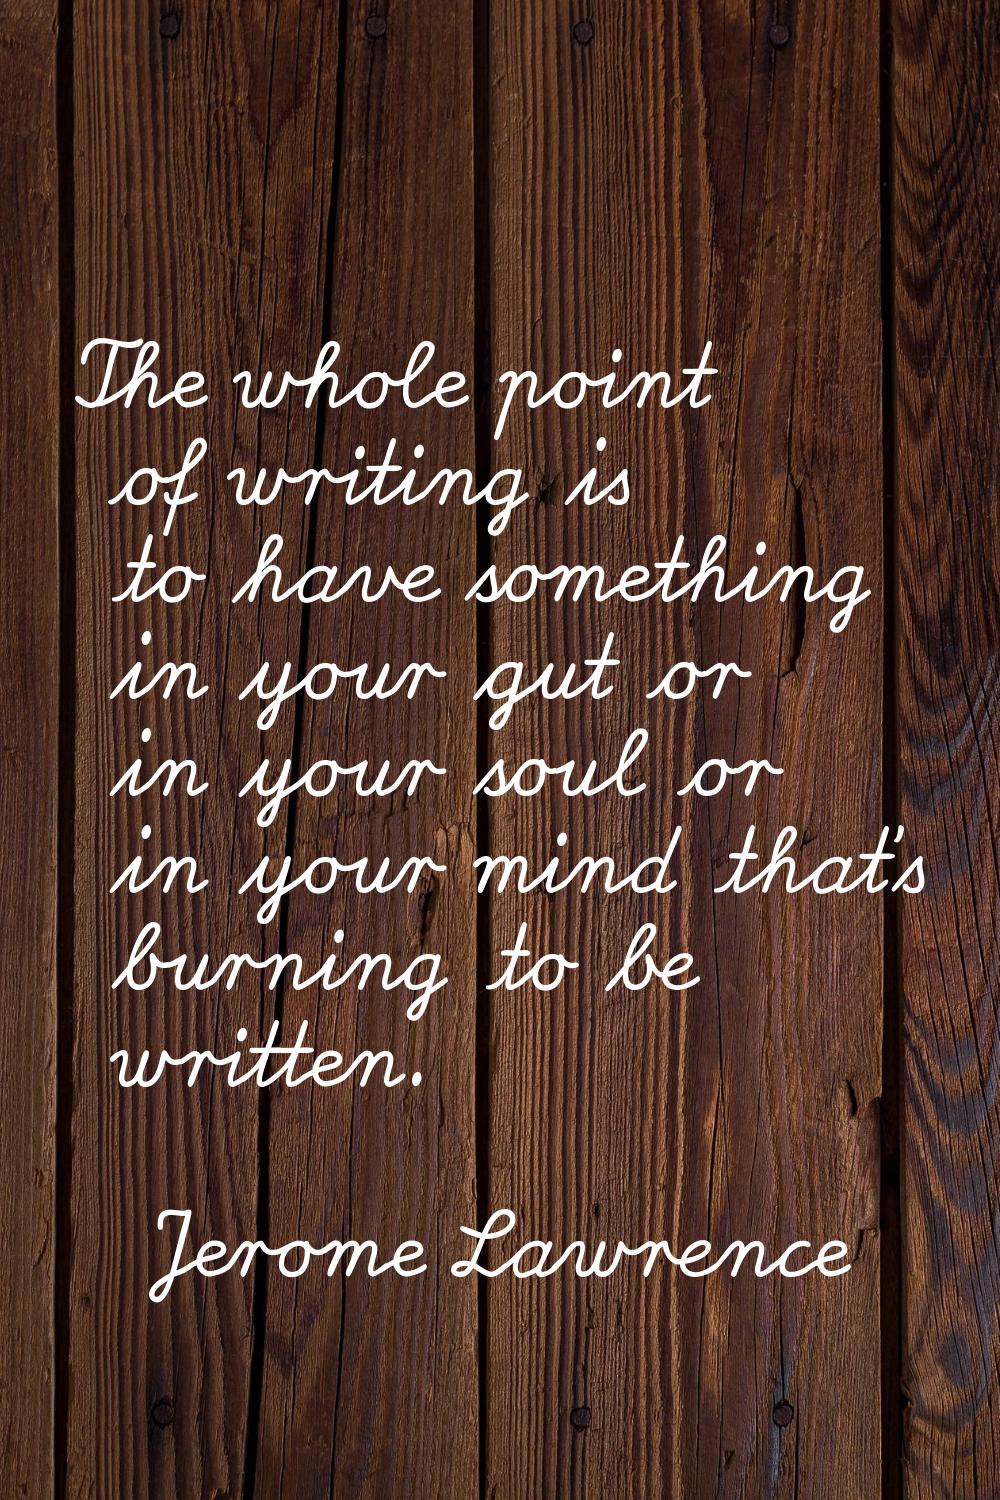 The whole point of writing is to have something in your gut or in your soul or in your mind that's 